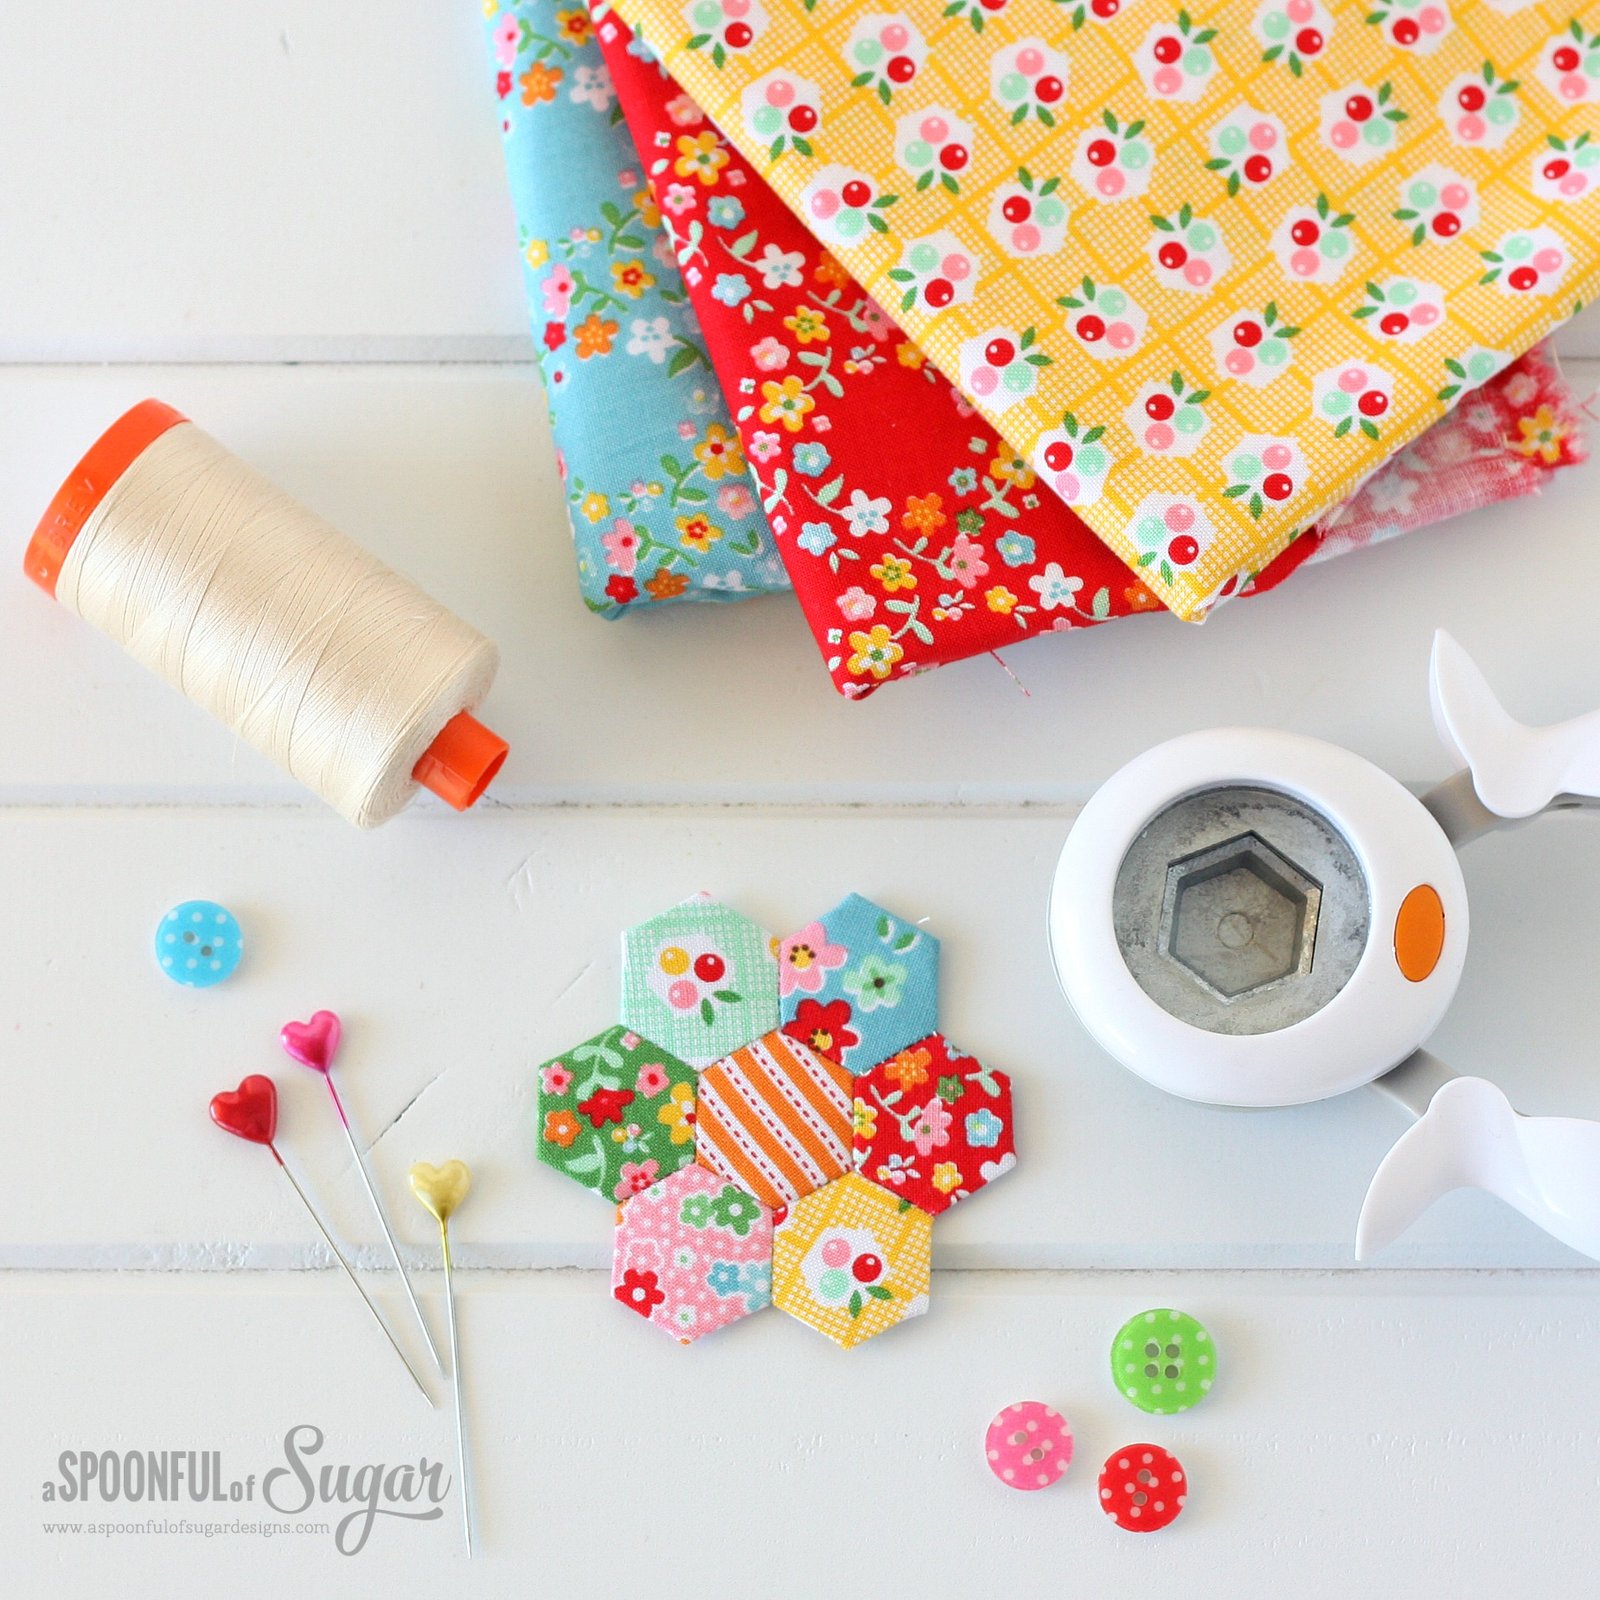 Hexie Pincushion Sewing Tutorial by A Spoonful of Sugar